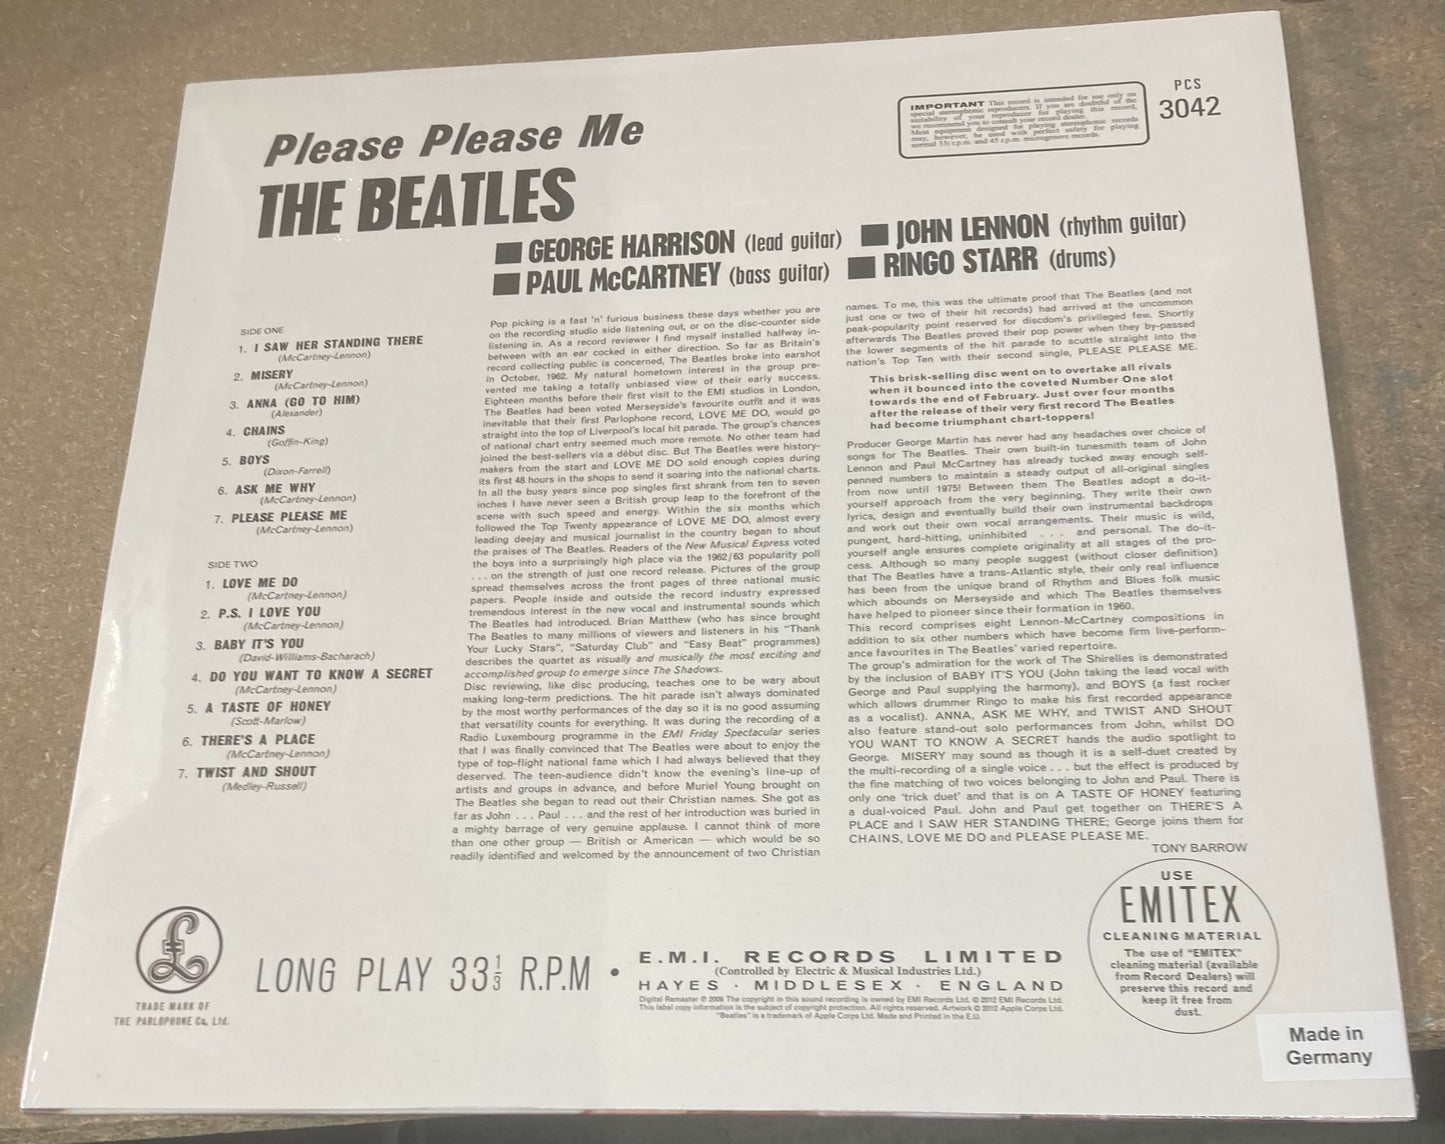 The back of ‘The Beatles - Please Please Me’ on vinyl